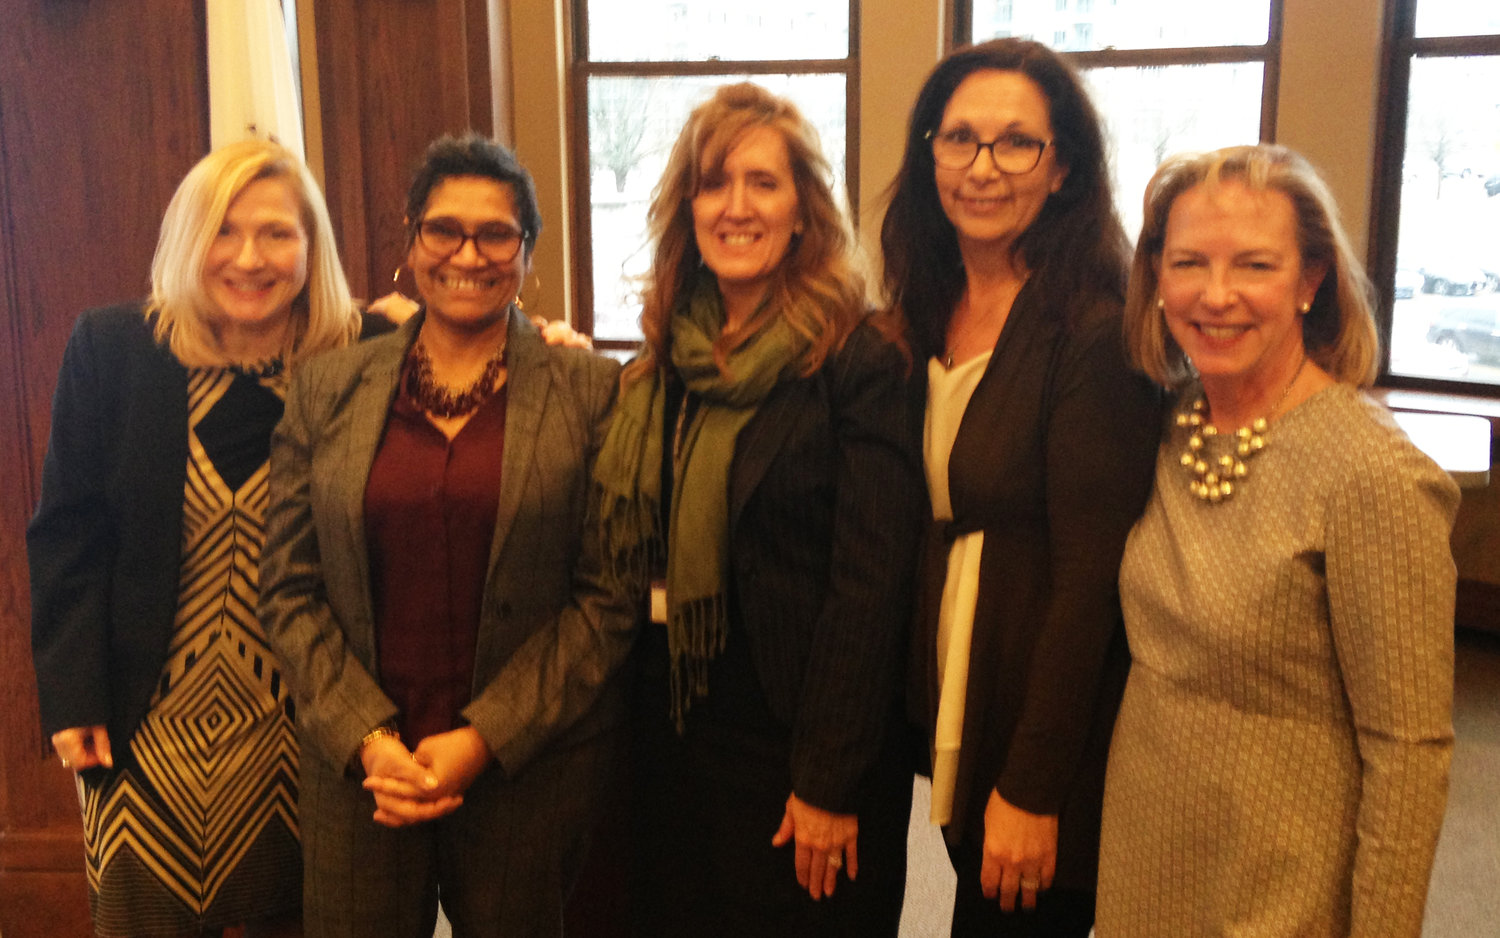 From left: The Honorable Lia Stuhlsatz, Associate Judge, R.I. Family Court; Ana Novais, executive director at the R.I. Department of Health, Trista Piccola, director, R.I. DCYF, Susan Dickstein, president, R.I. Association for Infant Mental Health, and Elizabeth Burke Bryant, executive director, Rhode Island Kids Count.